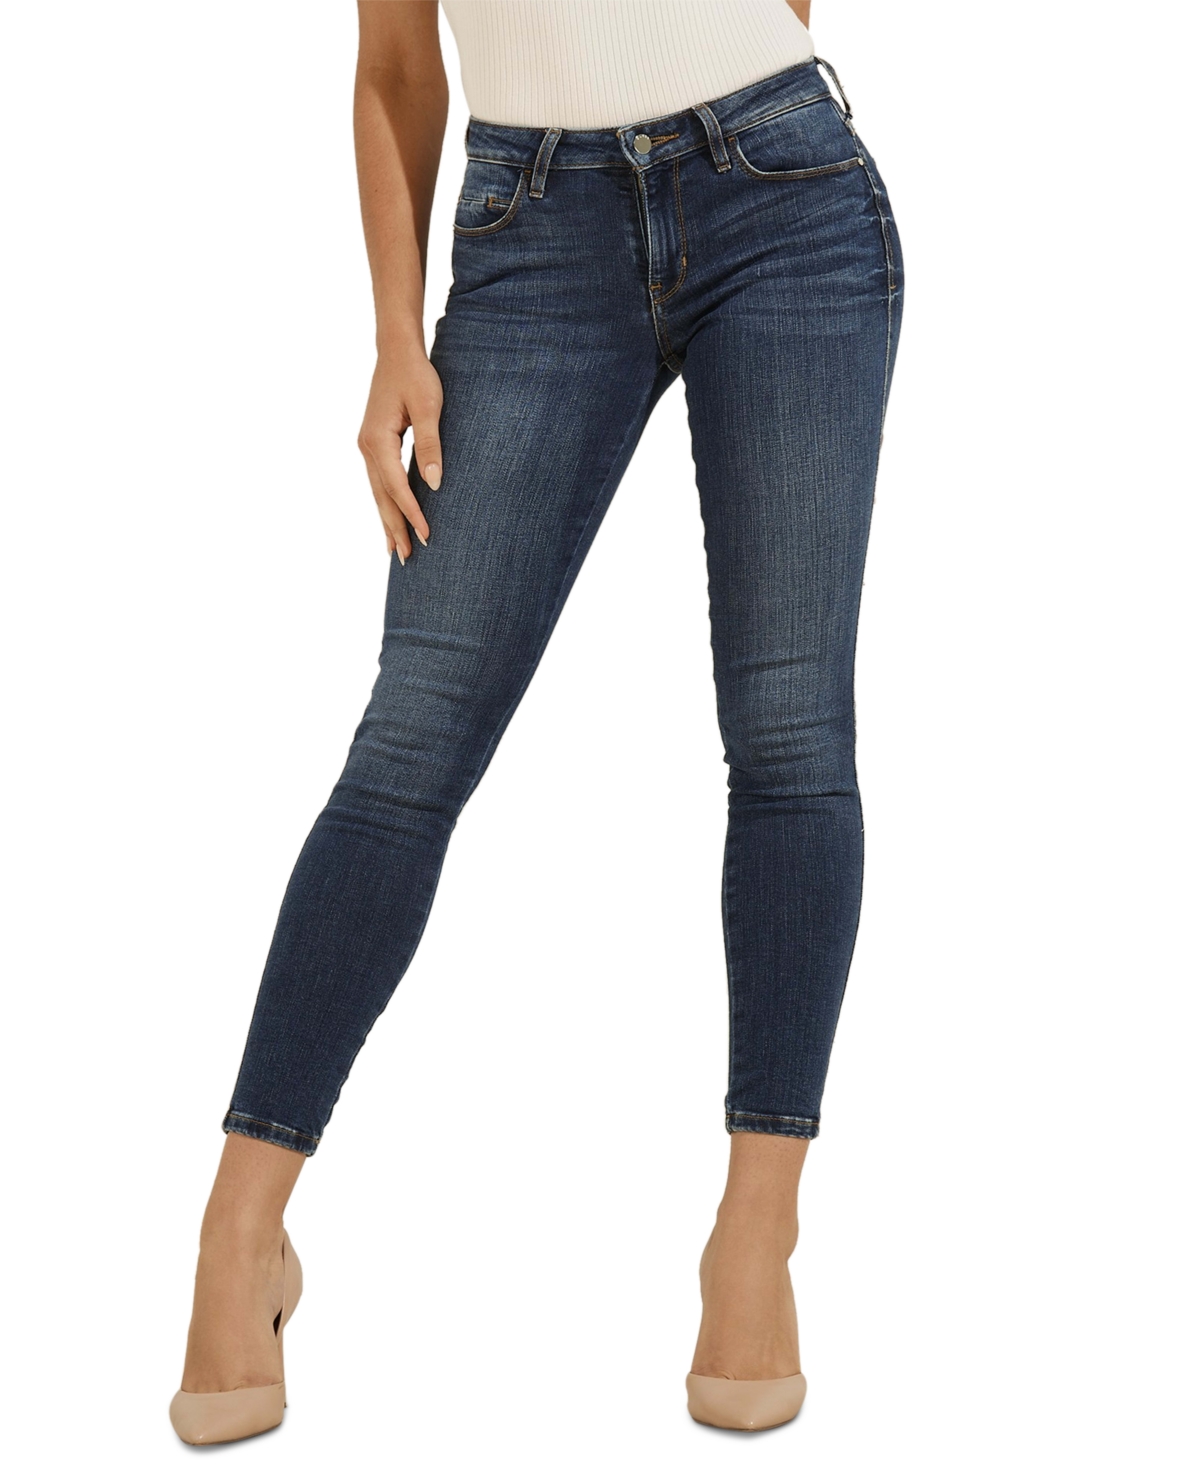  Guess Women's Mid-Rise Sexy Curve Skinny Jeans